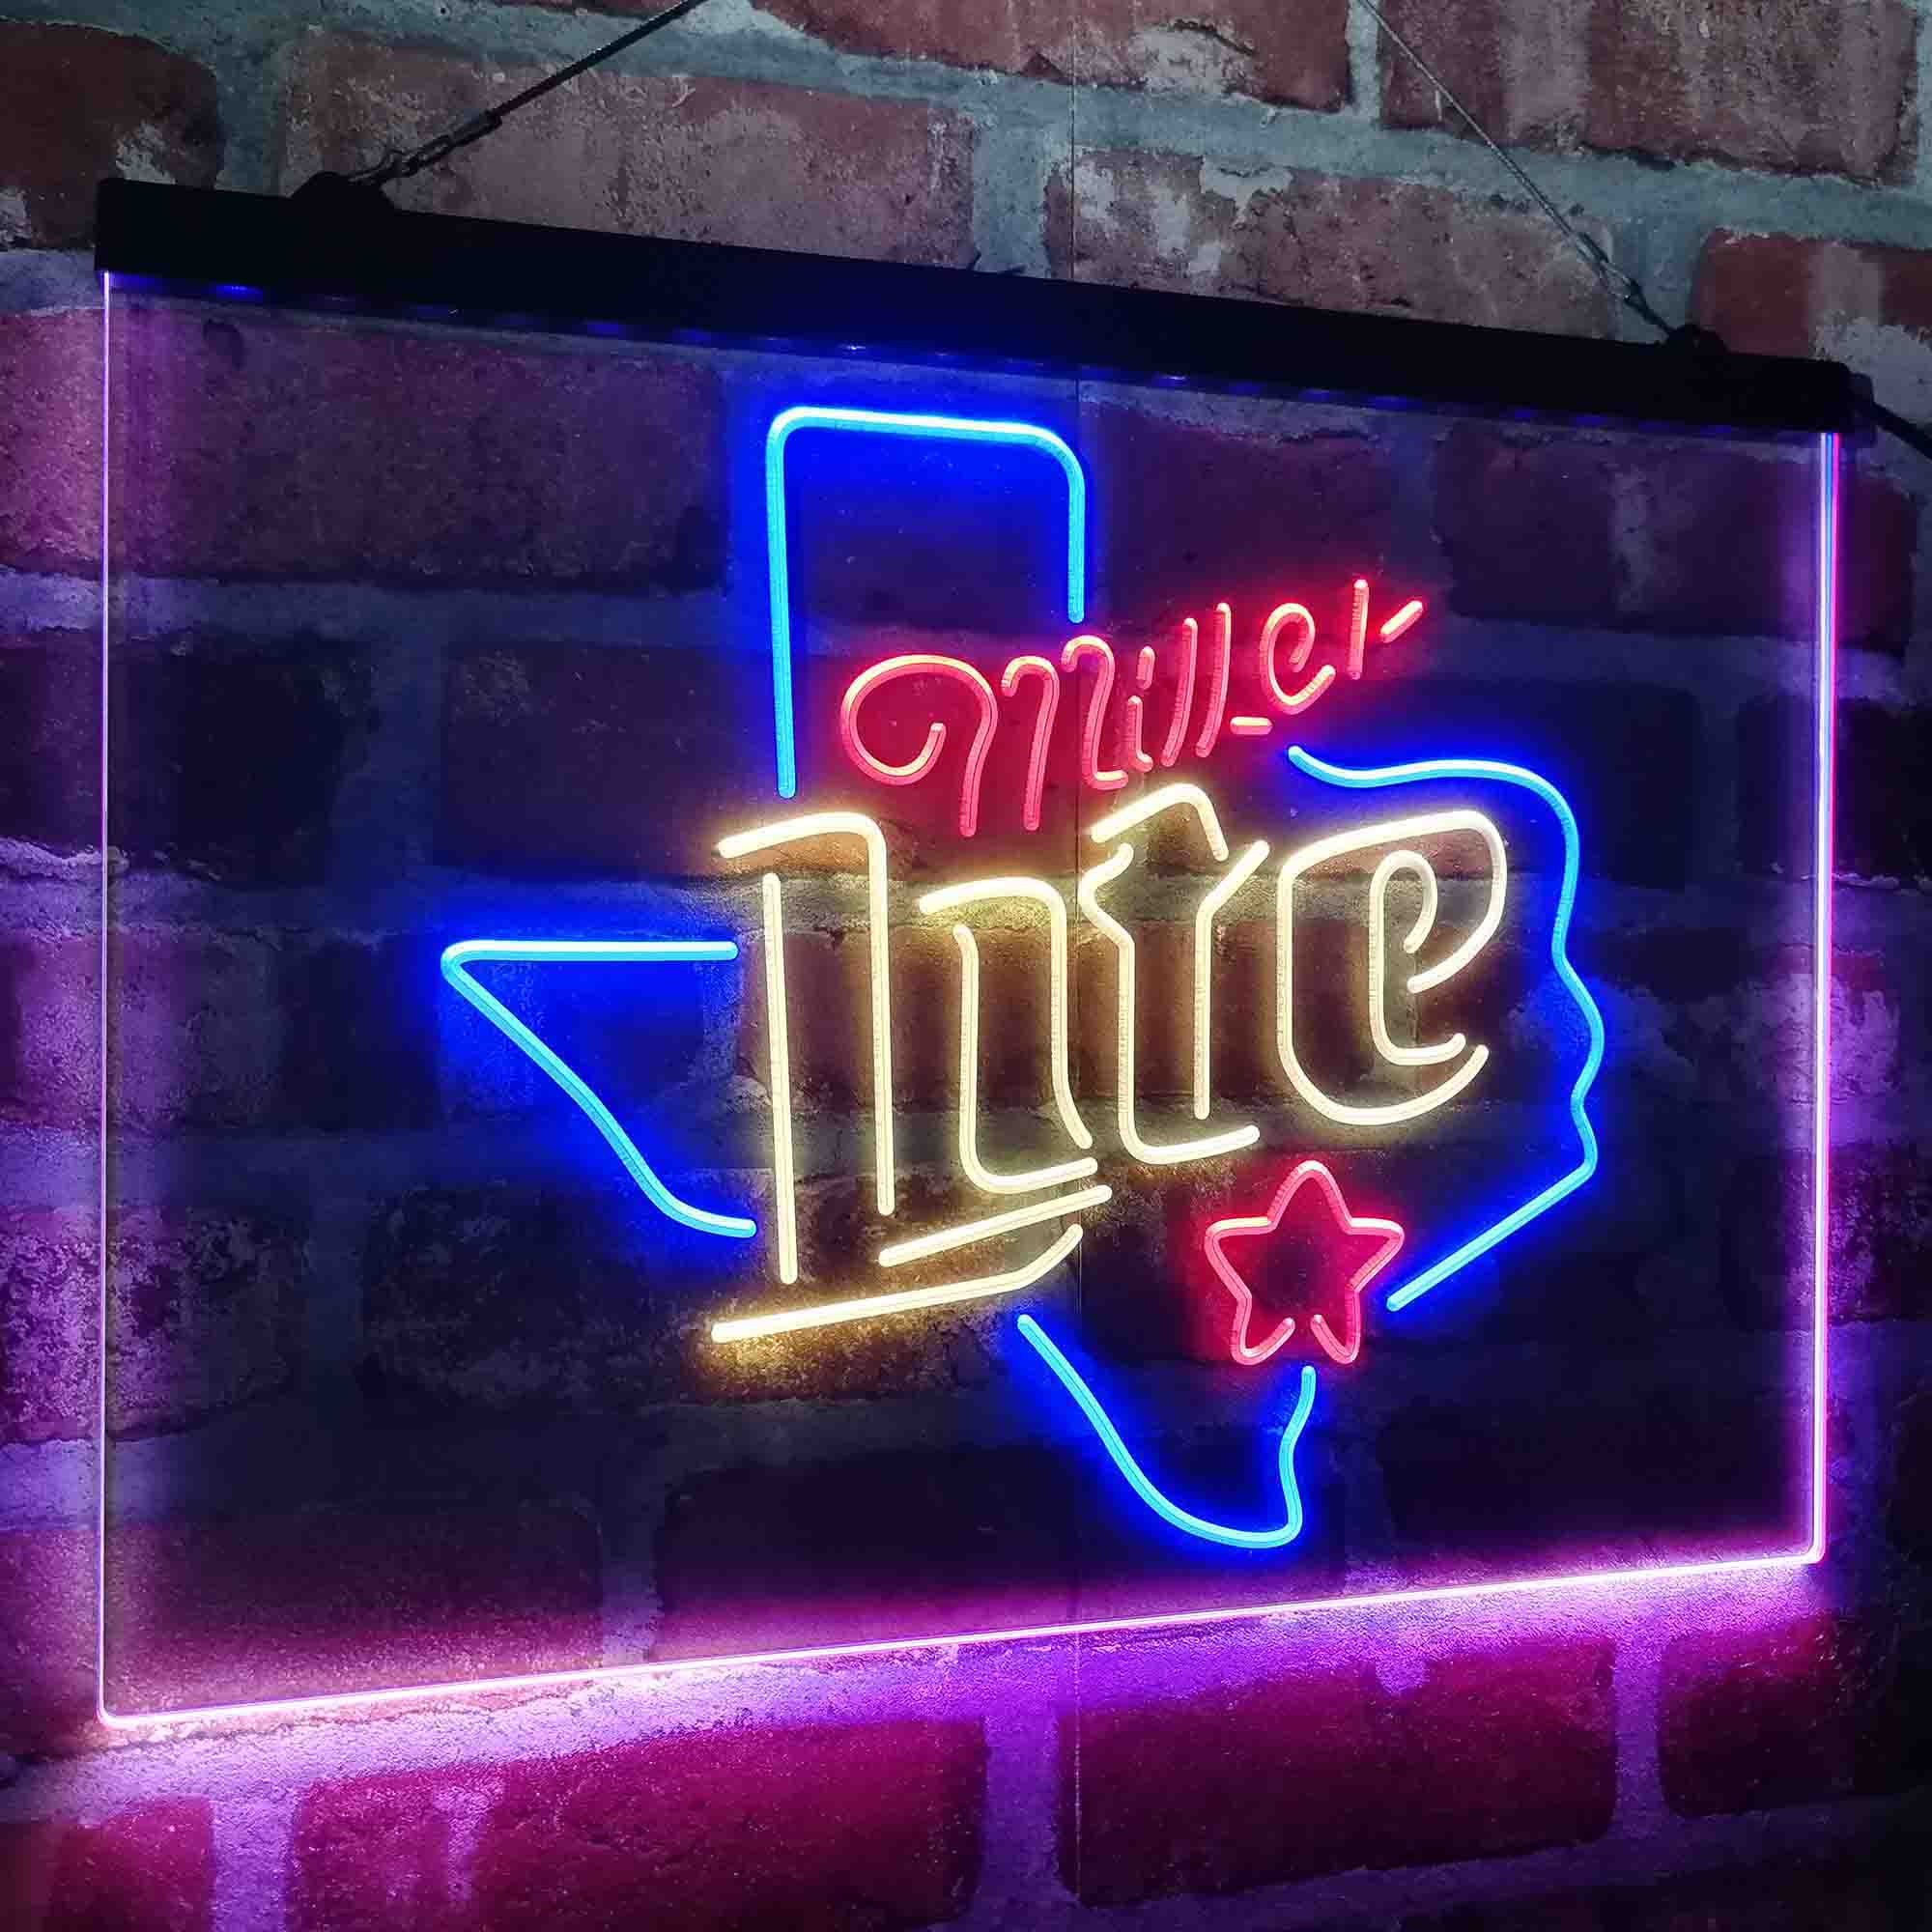 Miller Star Texas Beer Neon LED Sign 3 Colors